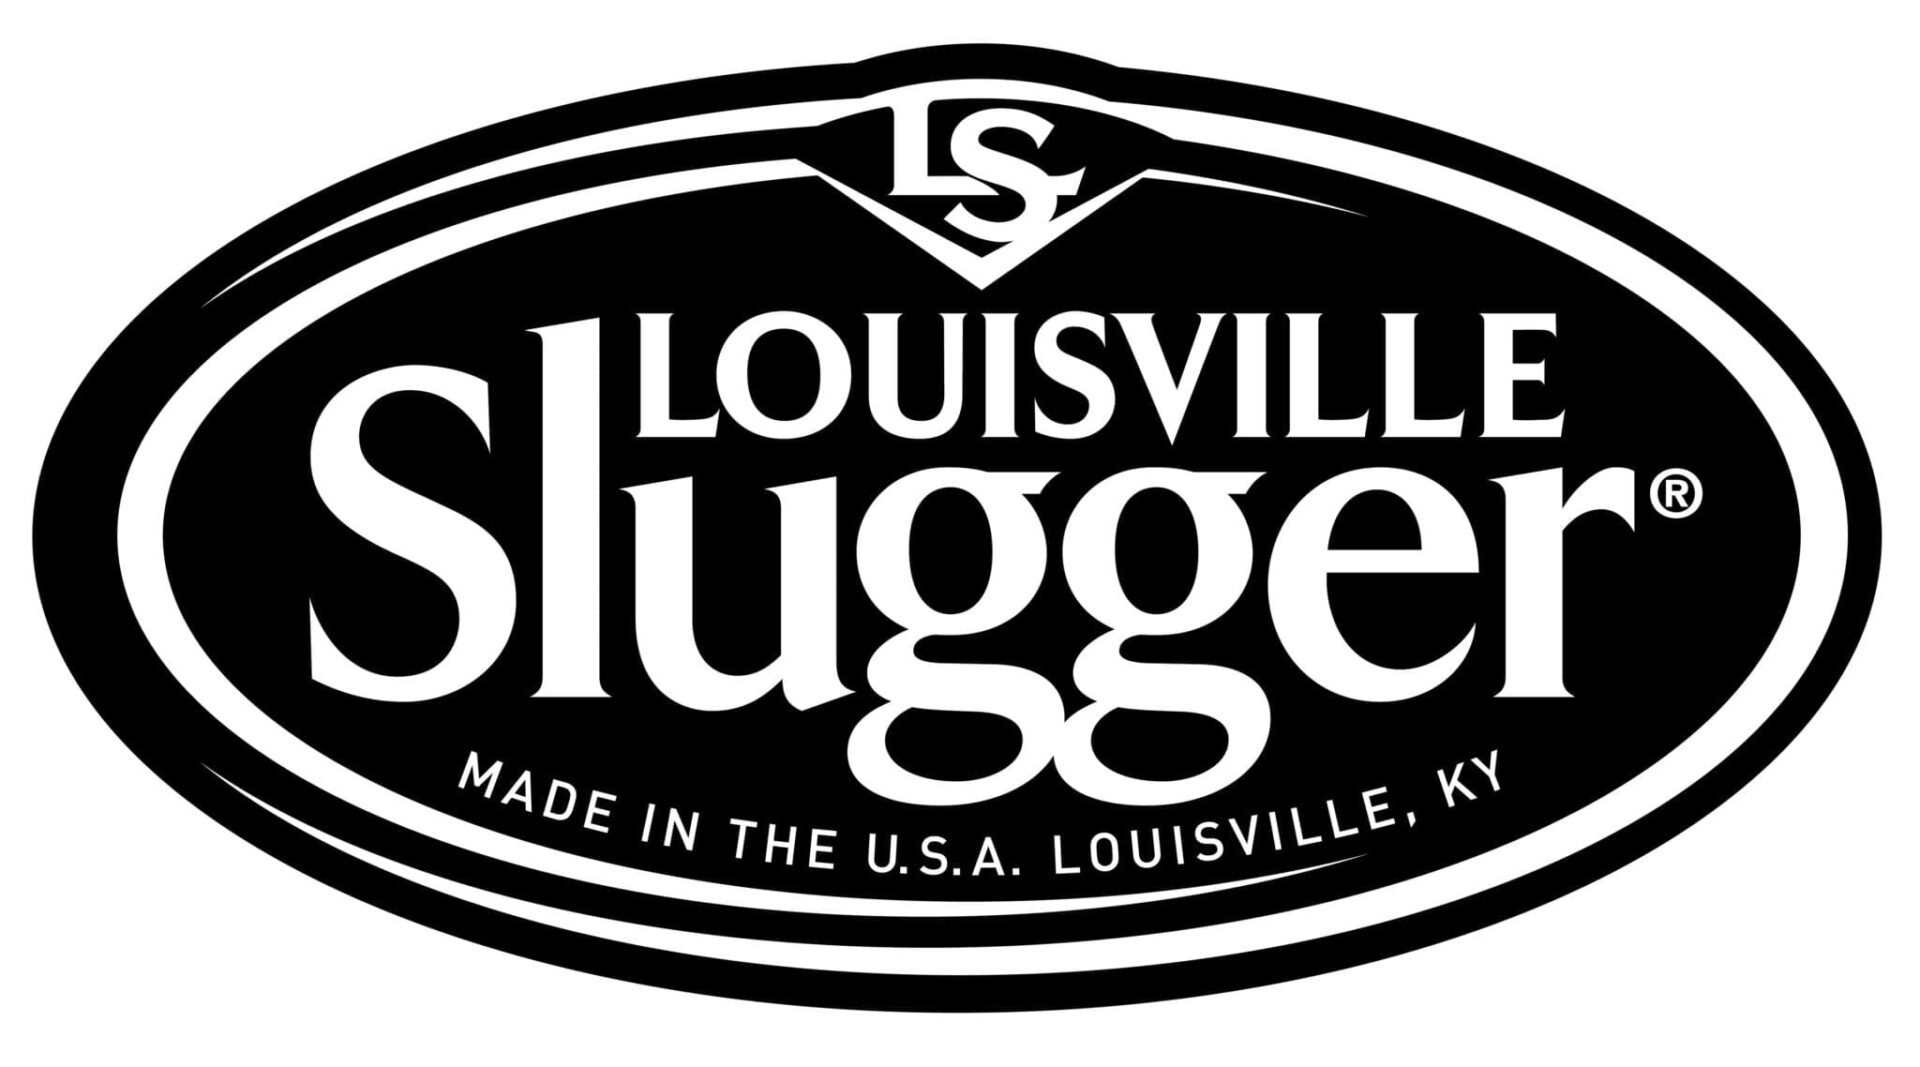 A black and white logo for louisville slugger.